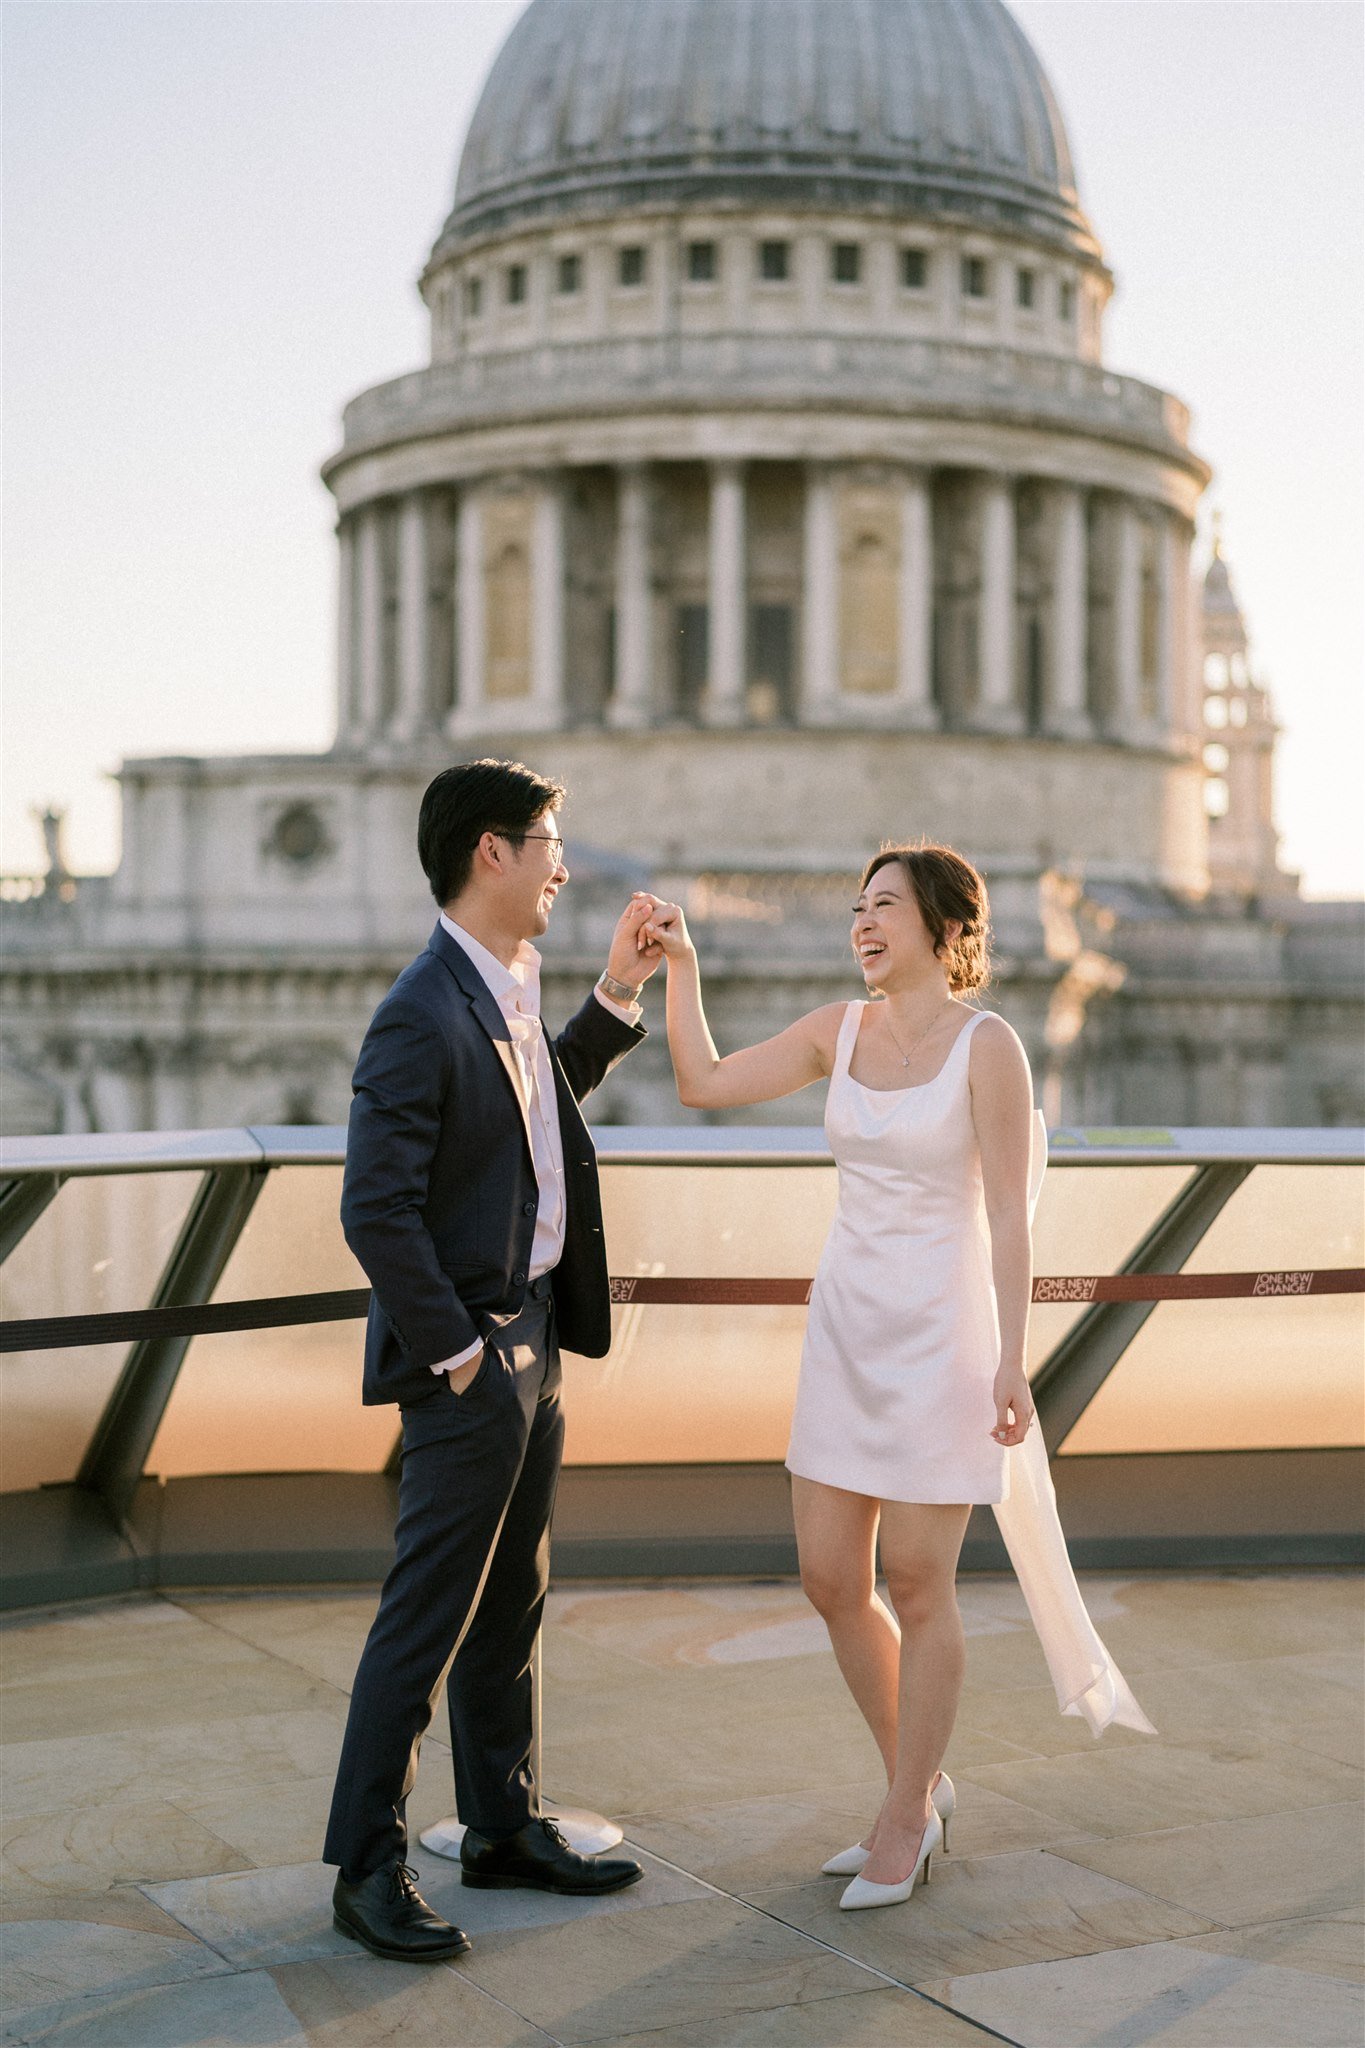 Couples Engagement Portrait session around St. Pauls Cathedral, London